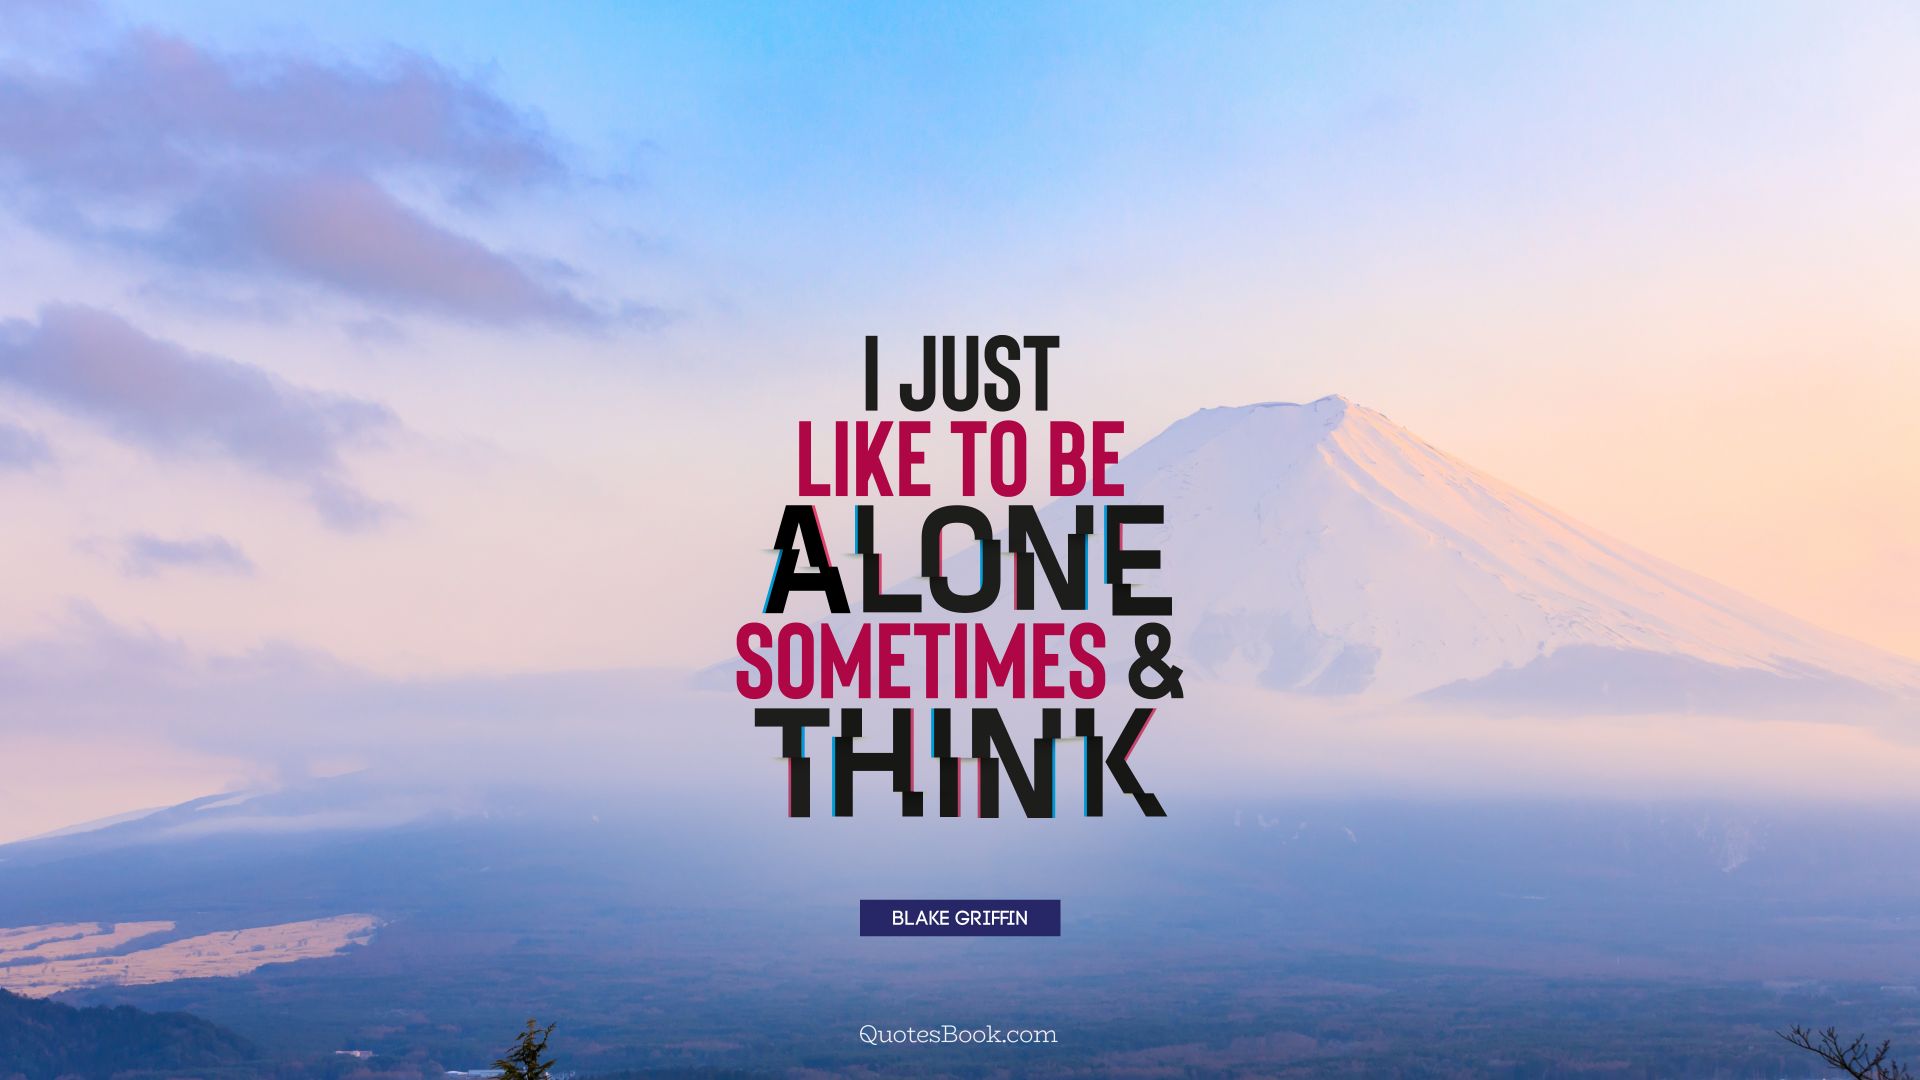 I just like to be alone sometimes and think. - Quote by Blake Griffin